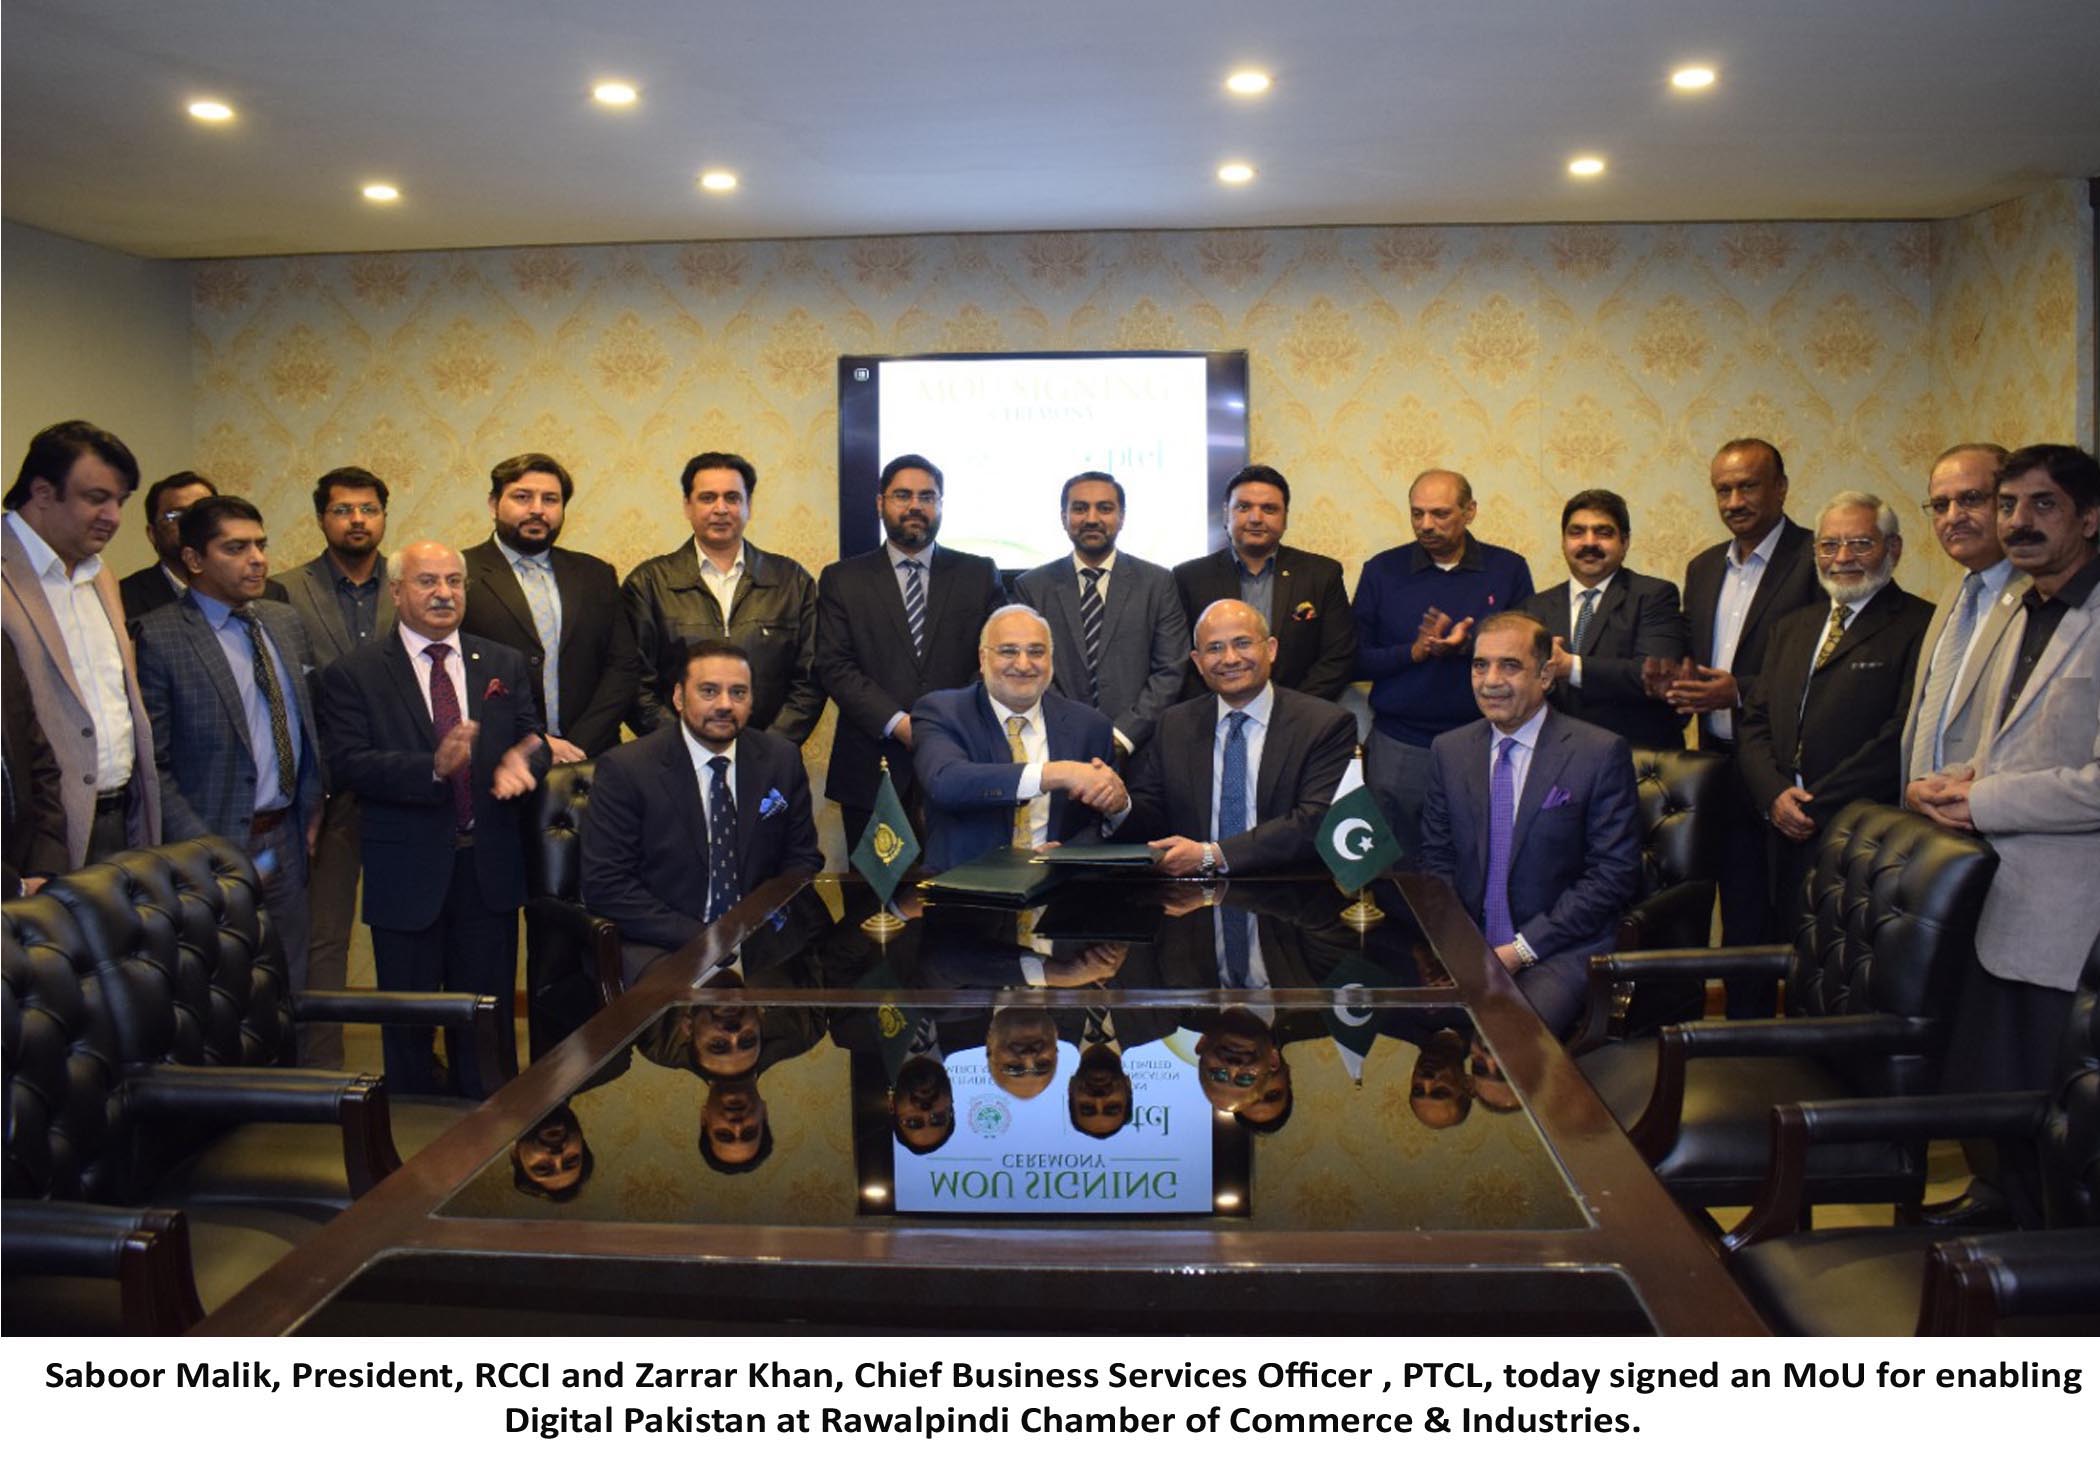 PTCL & RCCI collaborate to enable Digital Pakistan